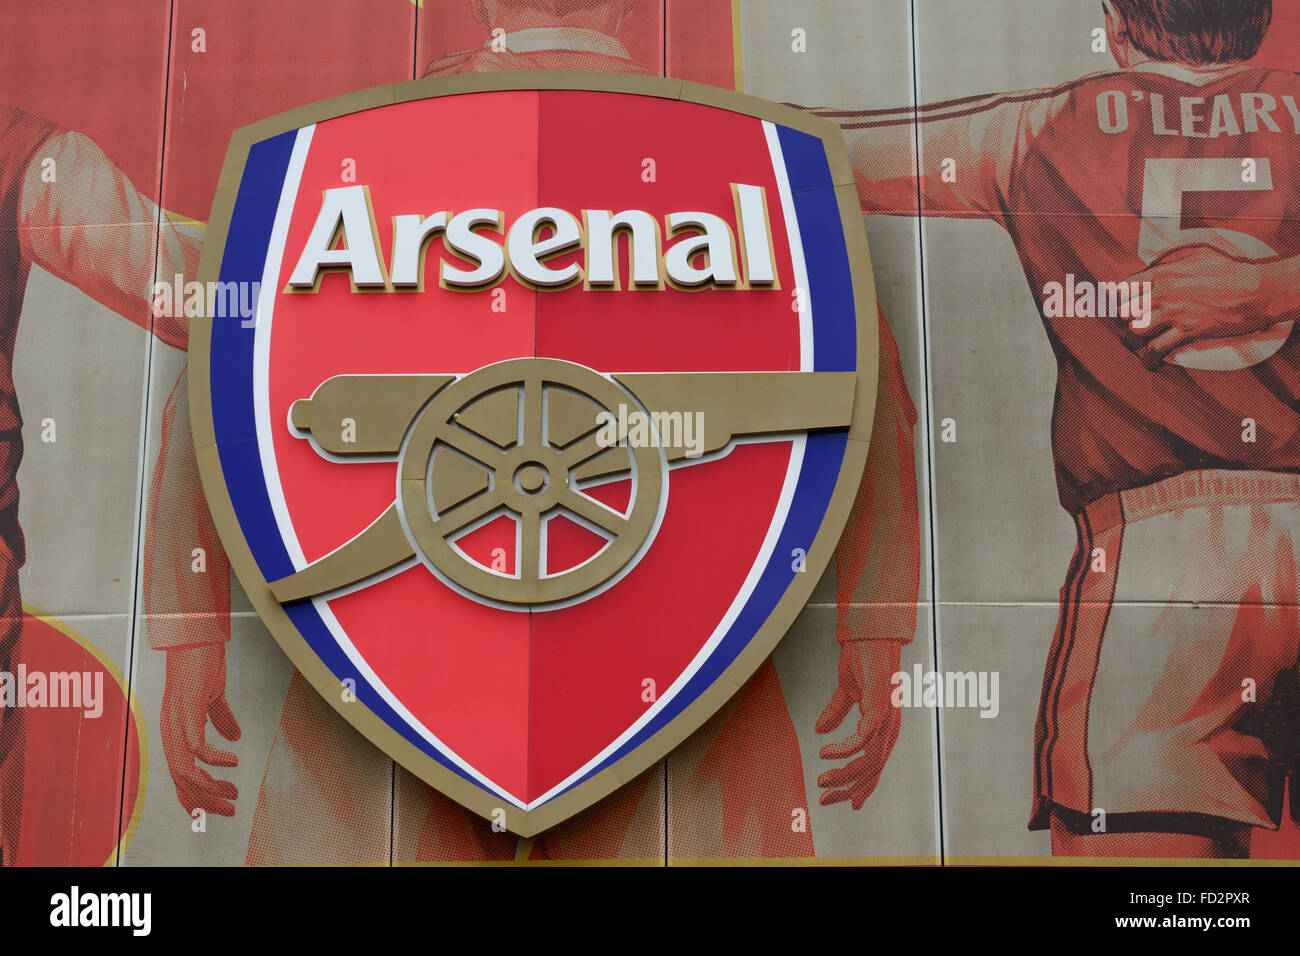 Arsenal logo on big poster with former star players on the outside of Emirates Stadium Stock Photo